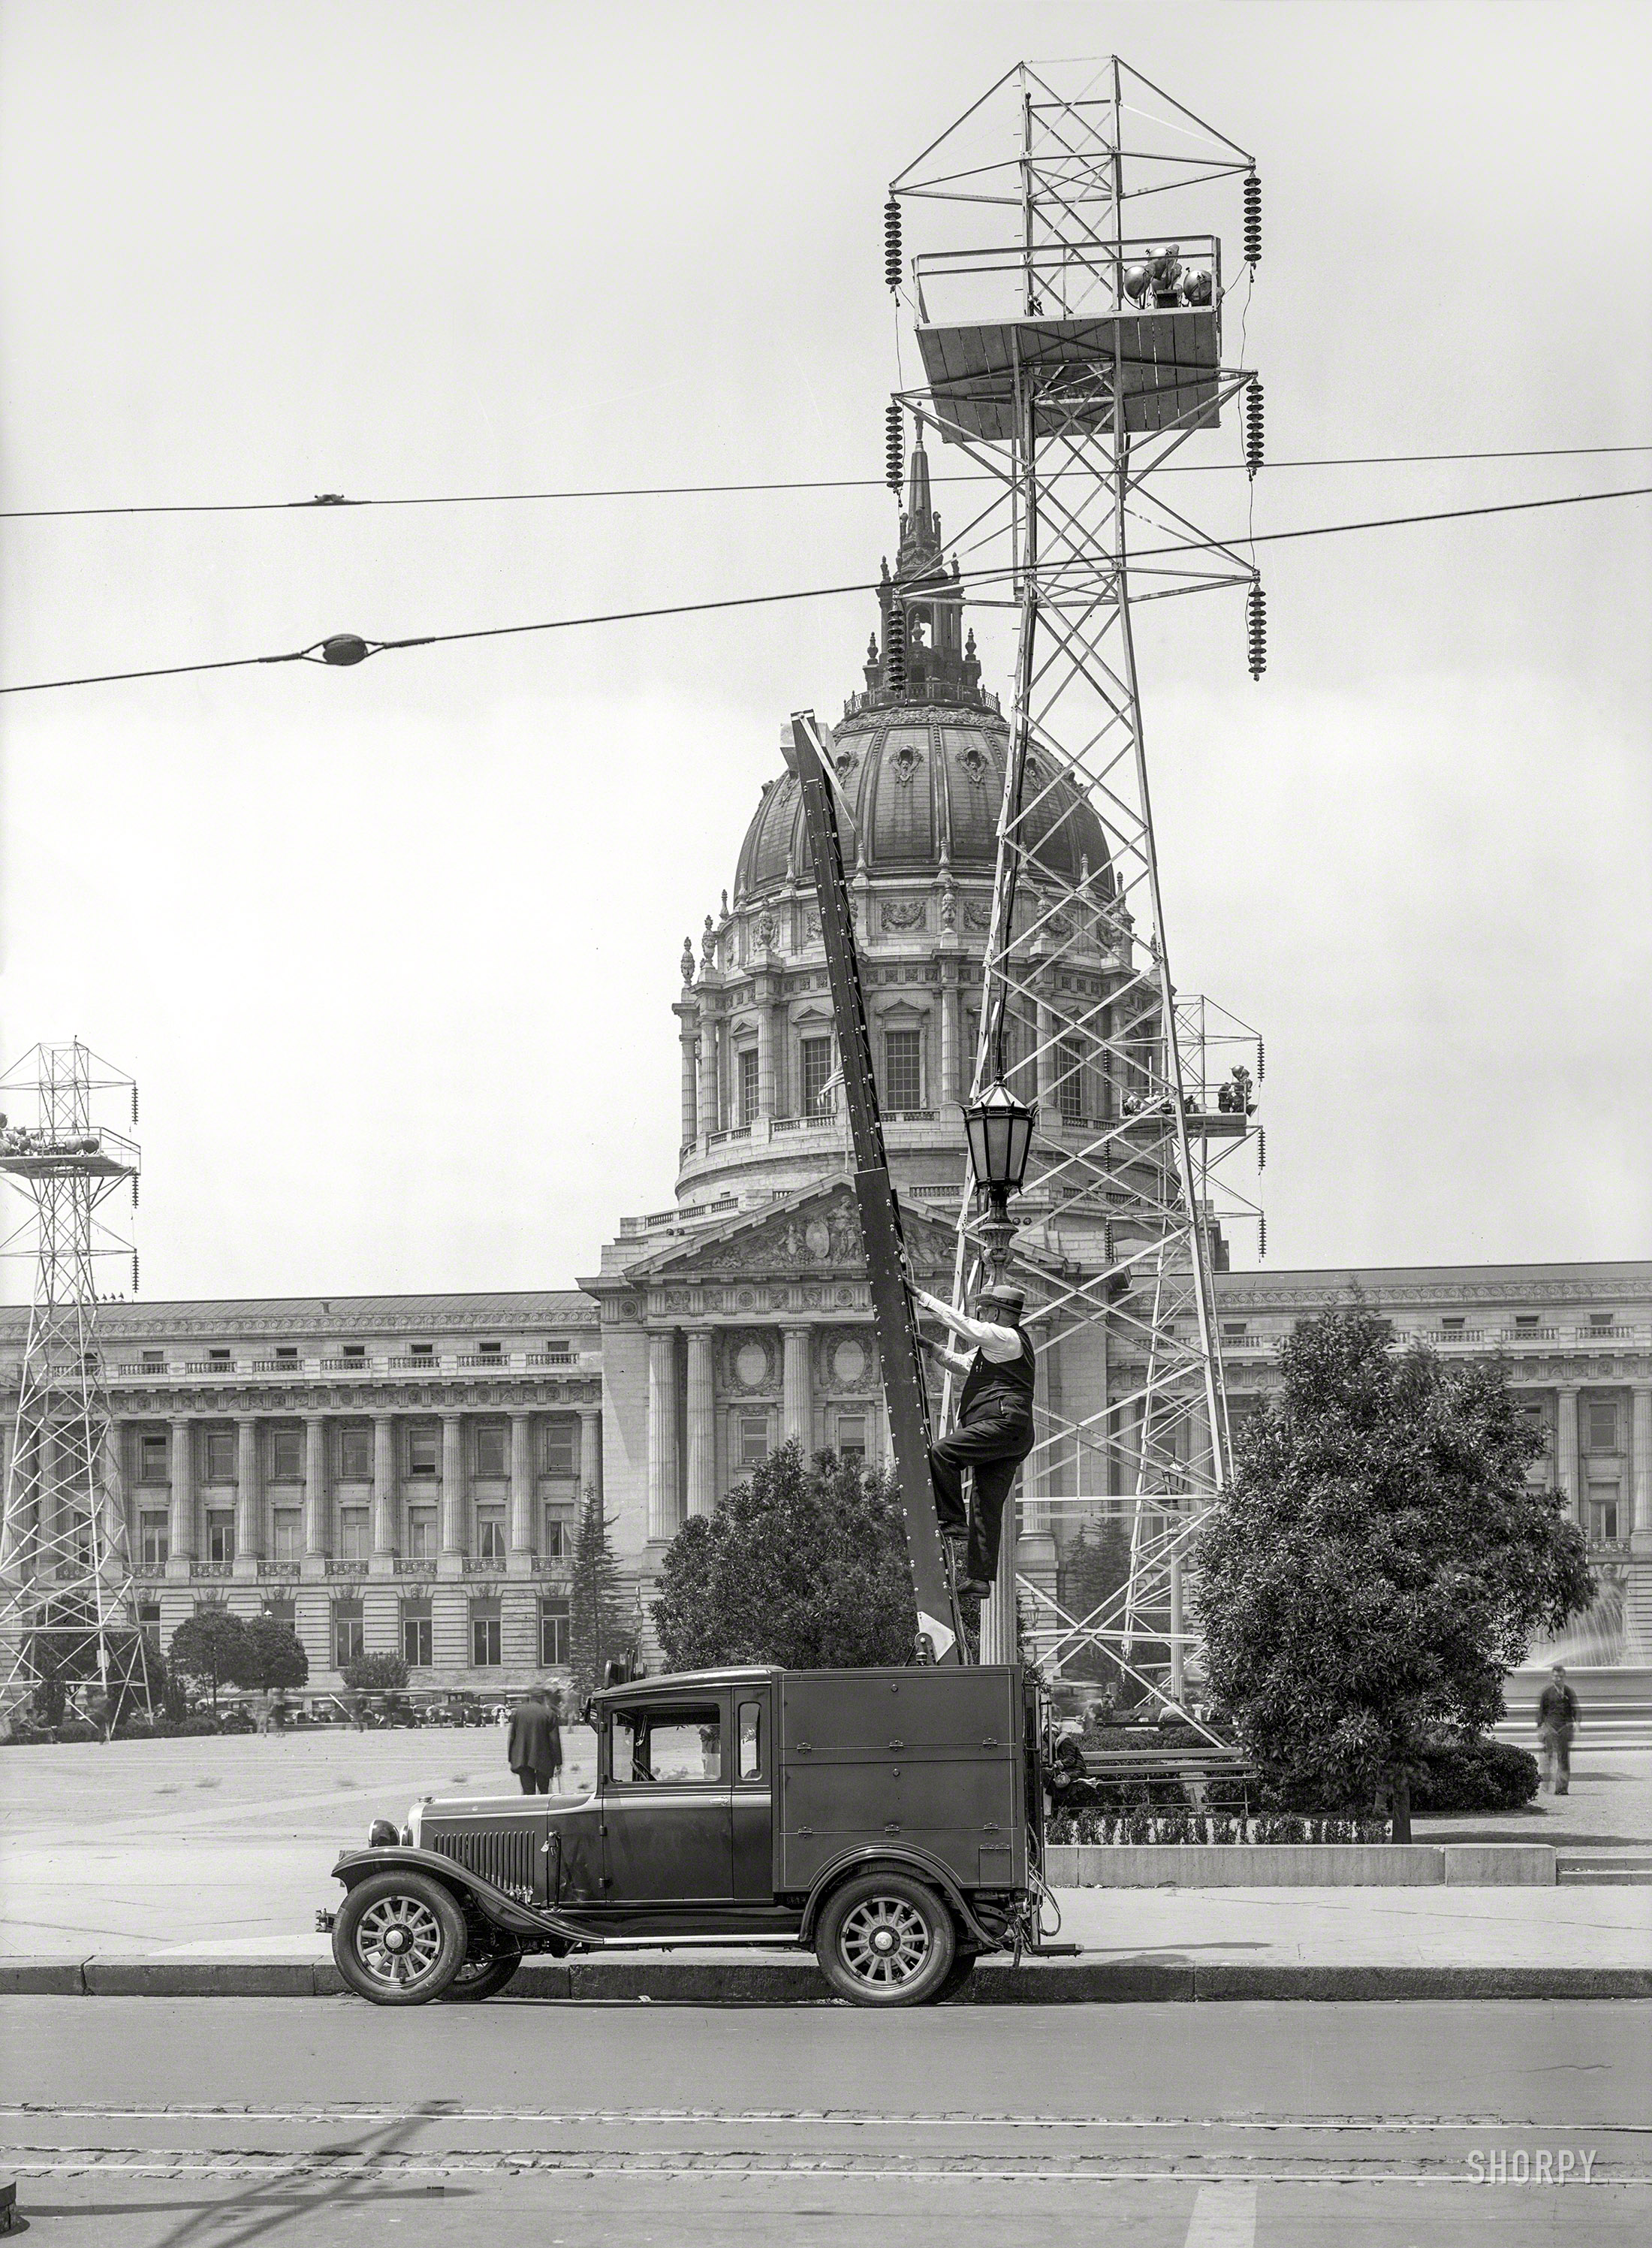 San Francisco circa 1929. "Dodge Brothers truck at City Hall." Where illumination seems to be the order of the day (or night). 5x7 glass negative. View full size.